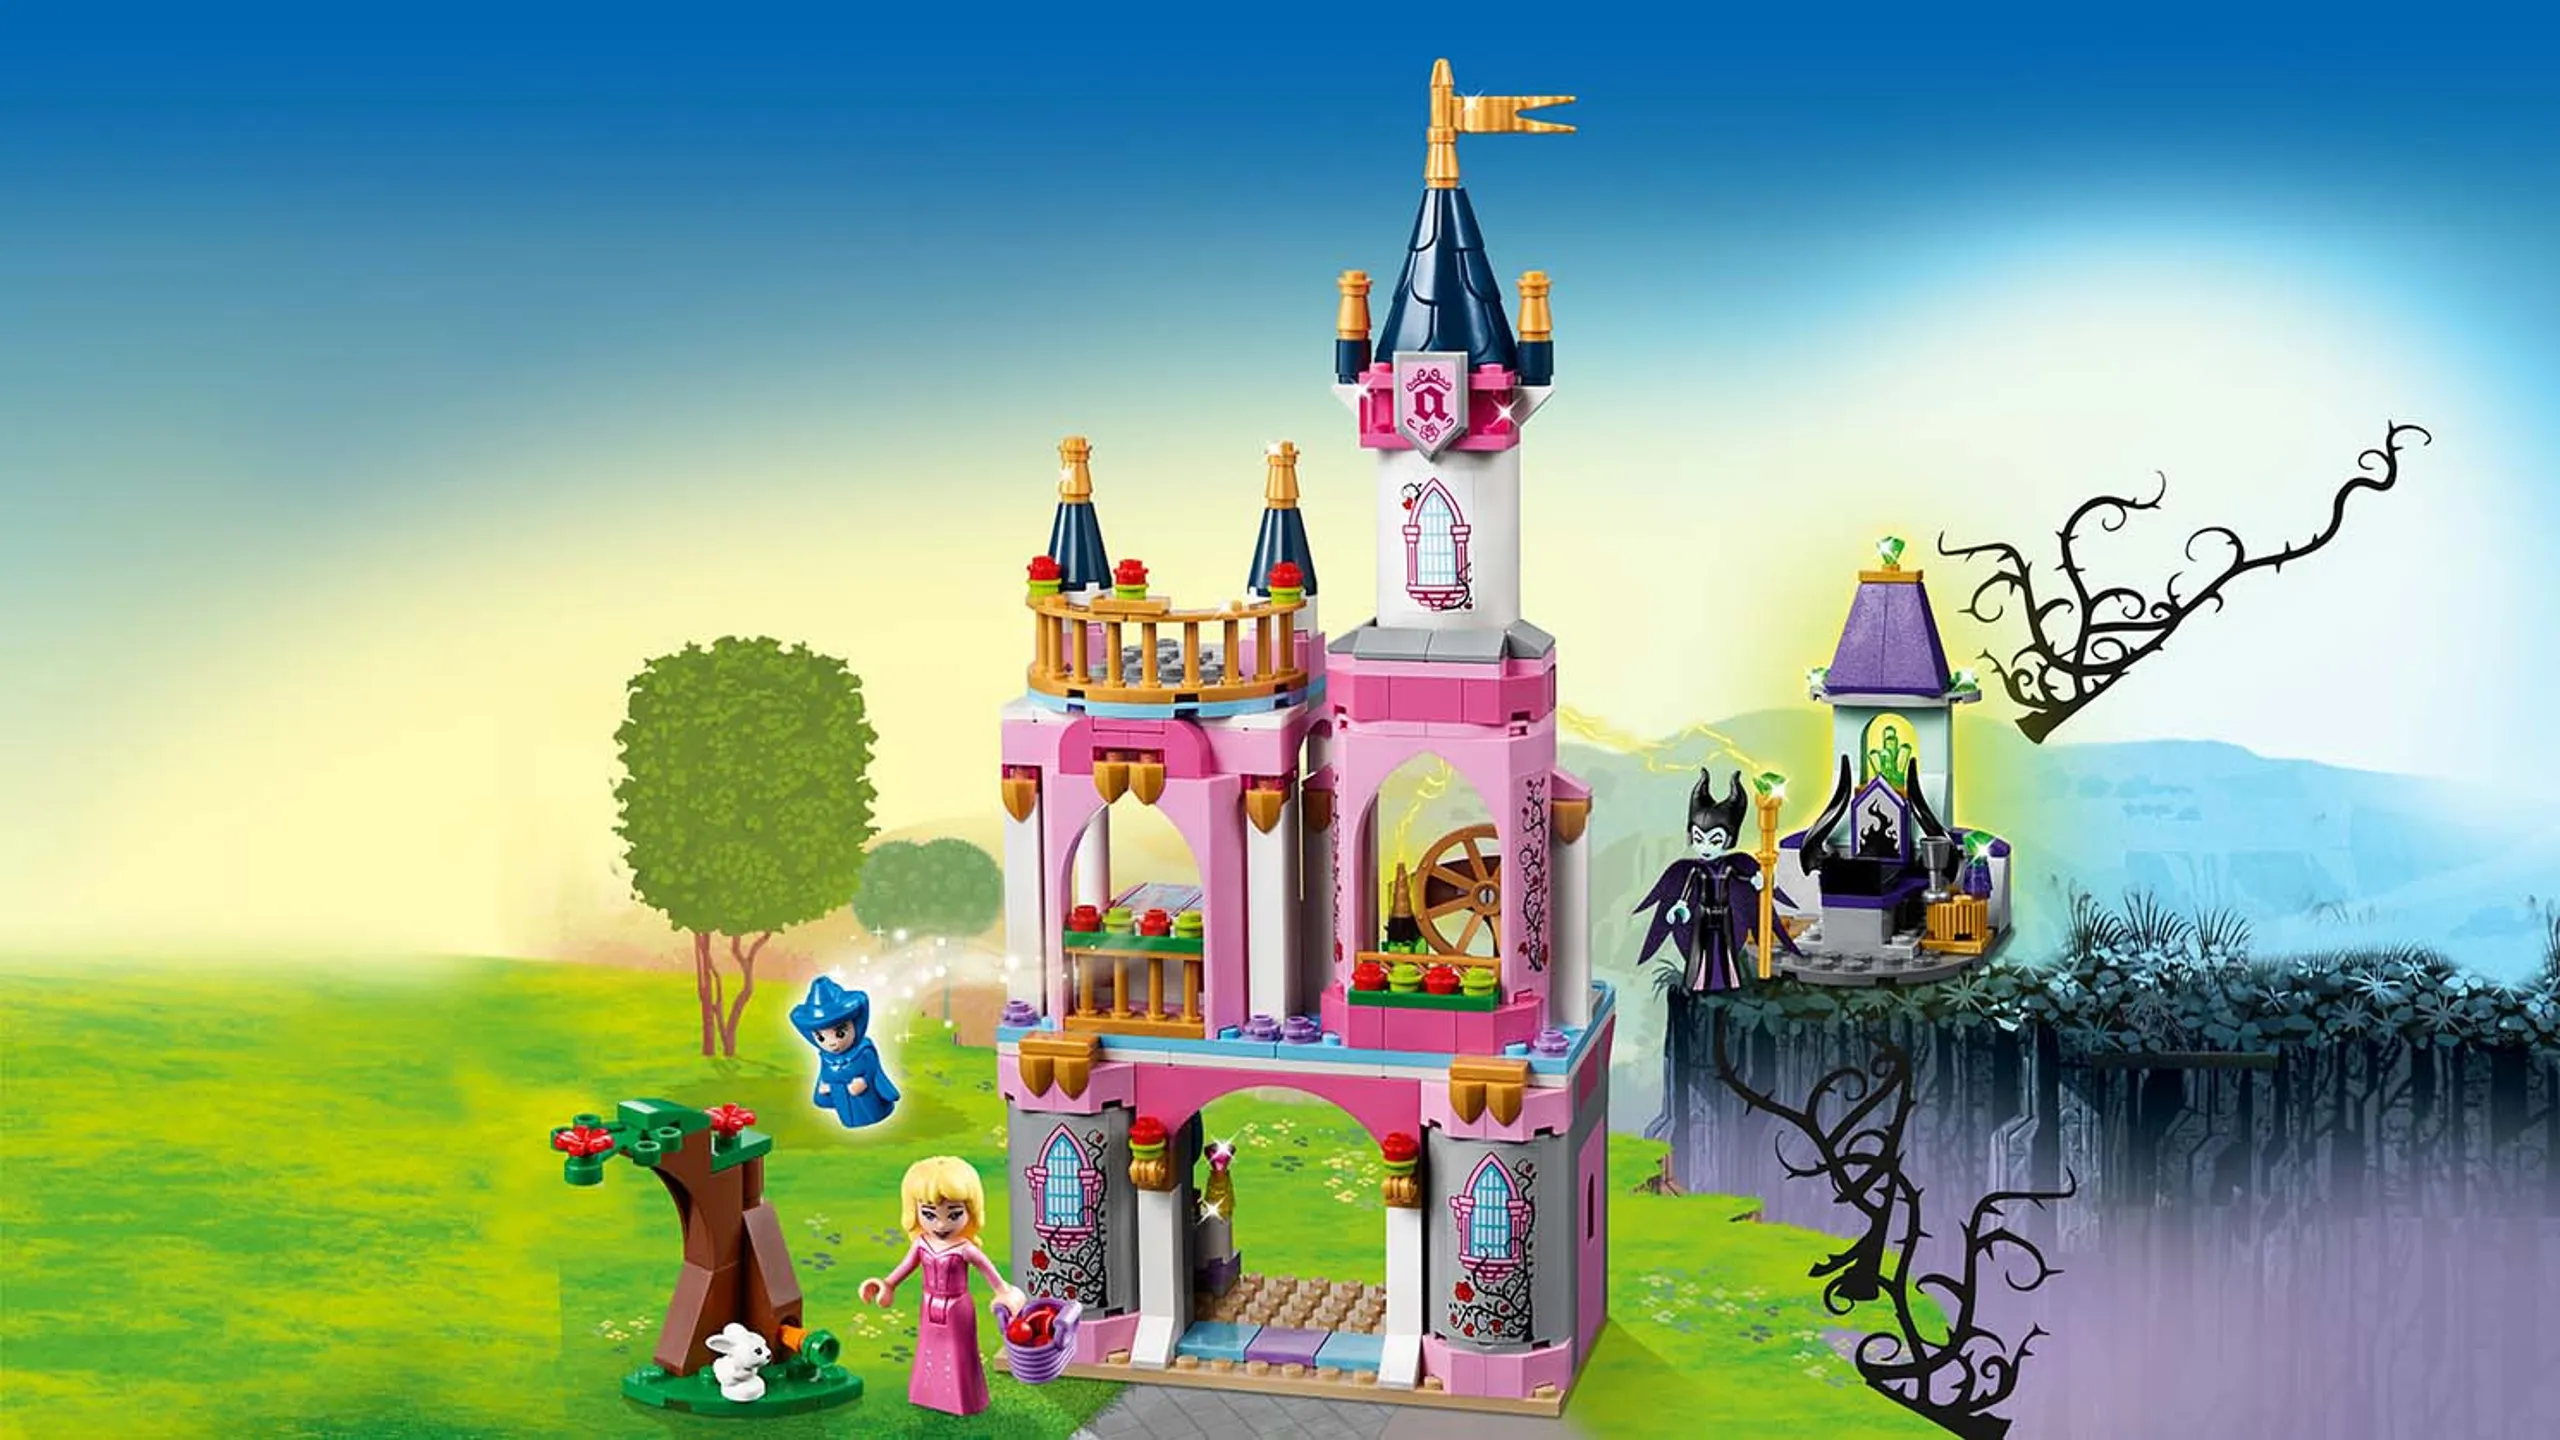 LEGO Disney - 41152 Sleeping Beauty's Fairytale Castle -  Build the castle for Disney Princess Aurora with her friends the good fairy Merryweather and a little bunny. But be ware! Maleficient is nearby.